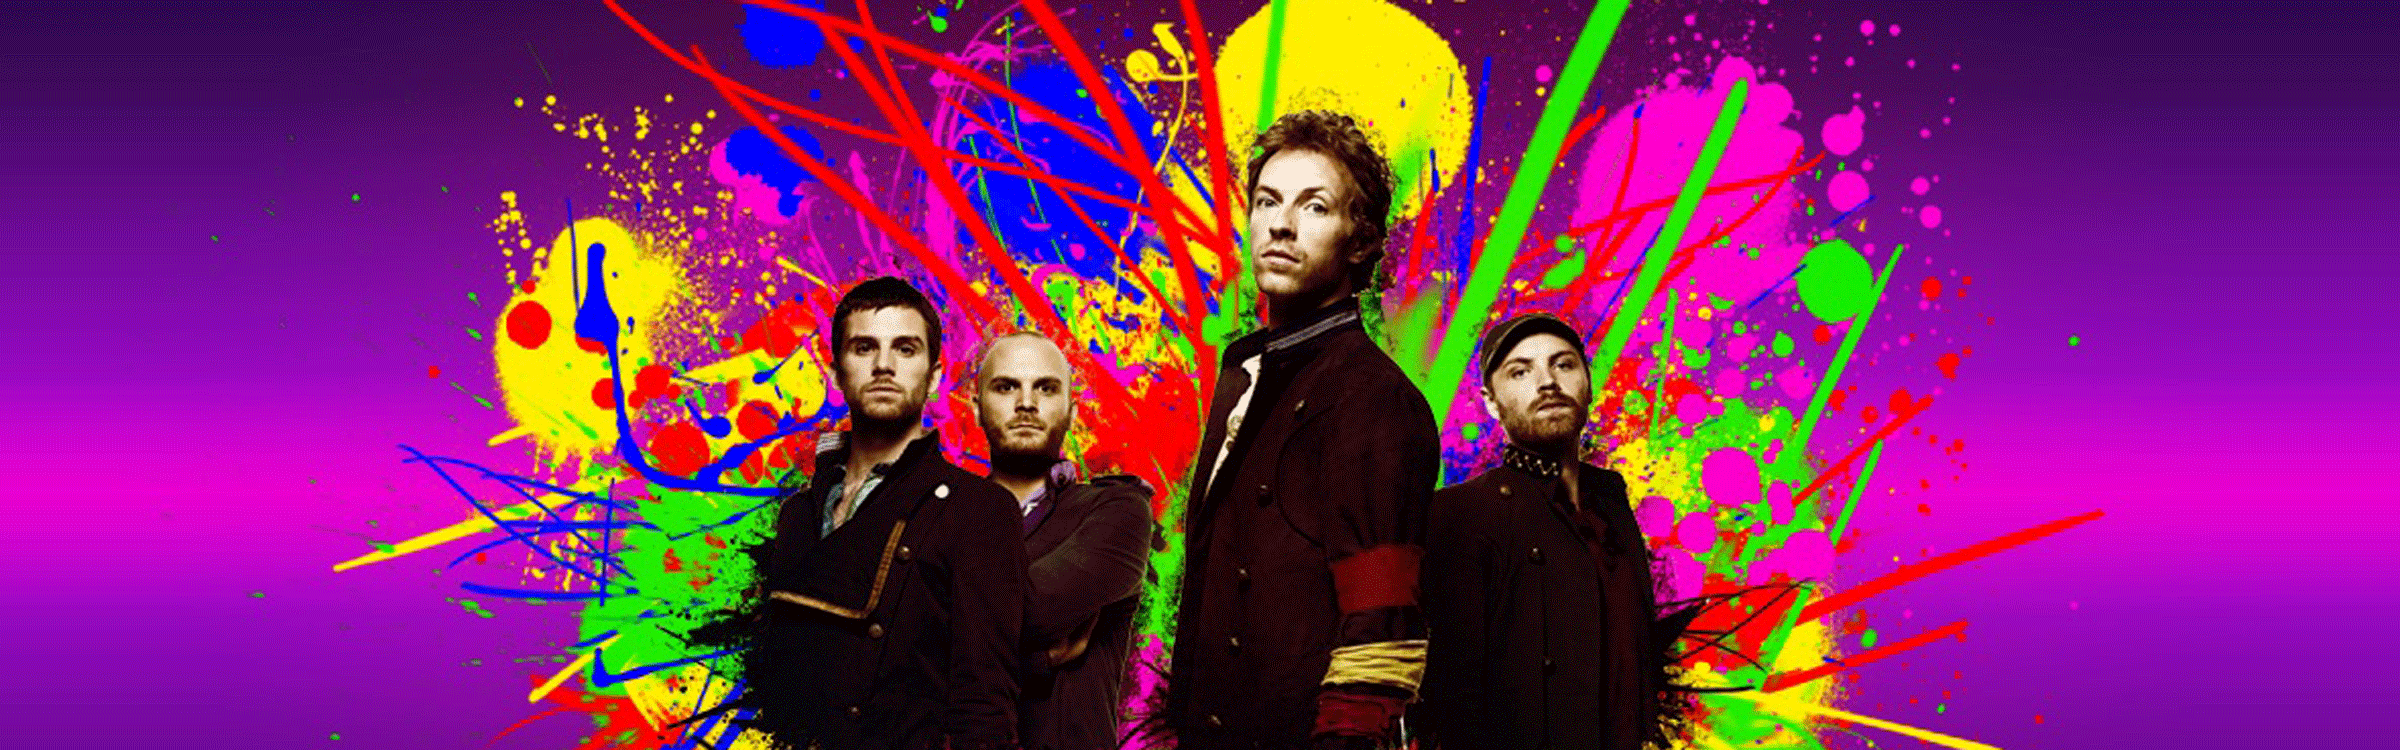 Coldplay wallpapers